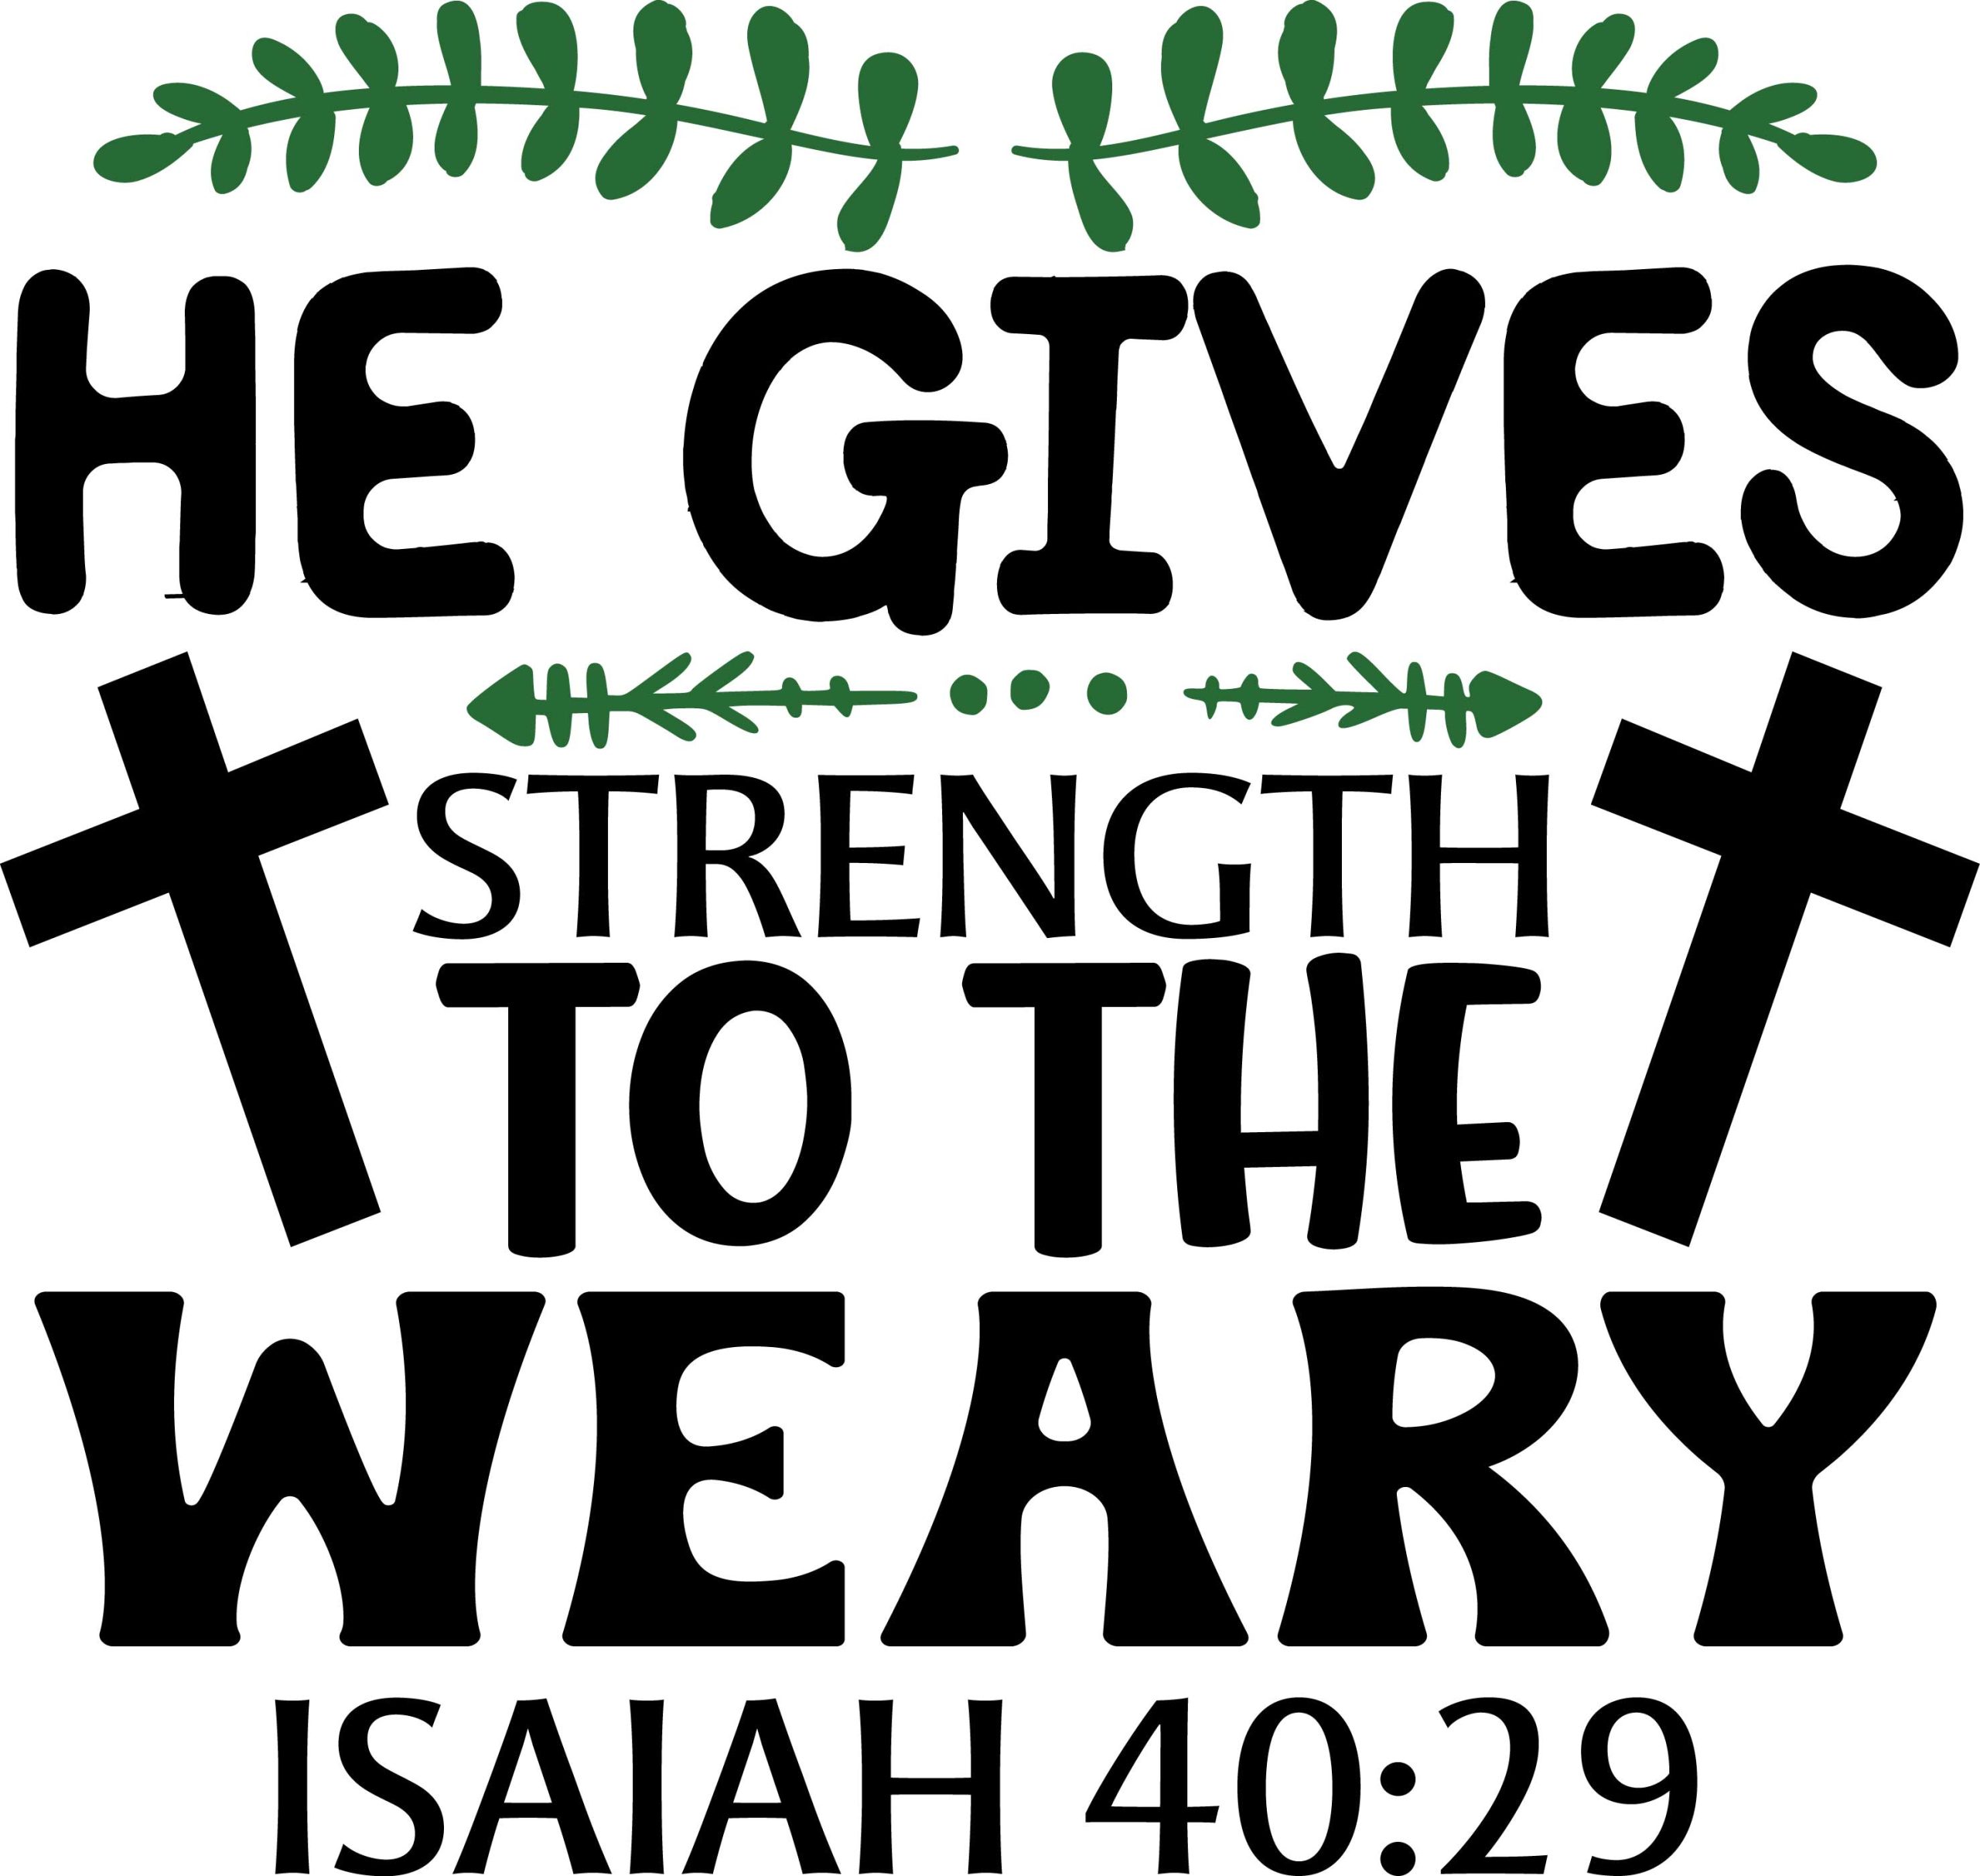 He gives strength to the weary, Isaiah 40:29, bible verses, scripture verses, svg files, passages, sayings, cricut designs, silhouette, embroidery, bundle, free cut files, design space, vector